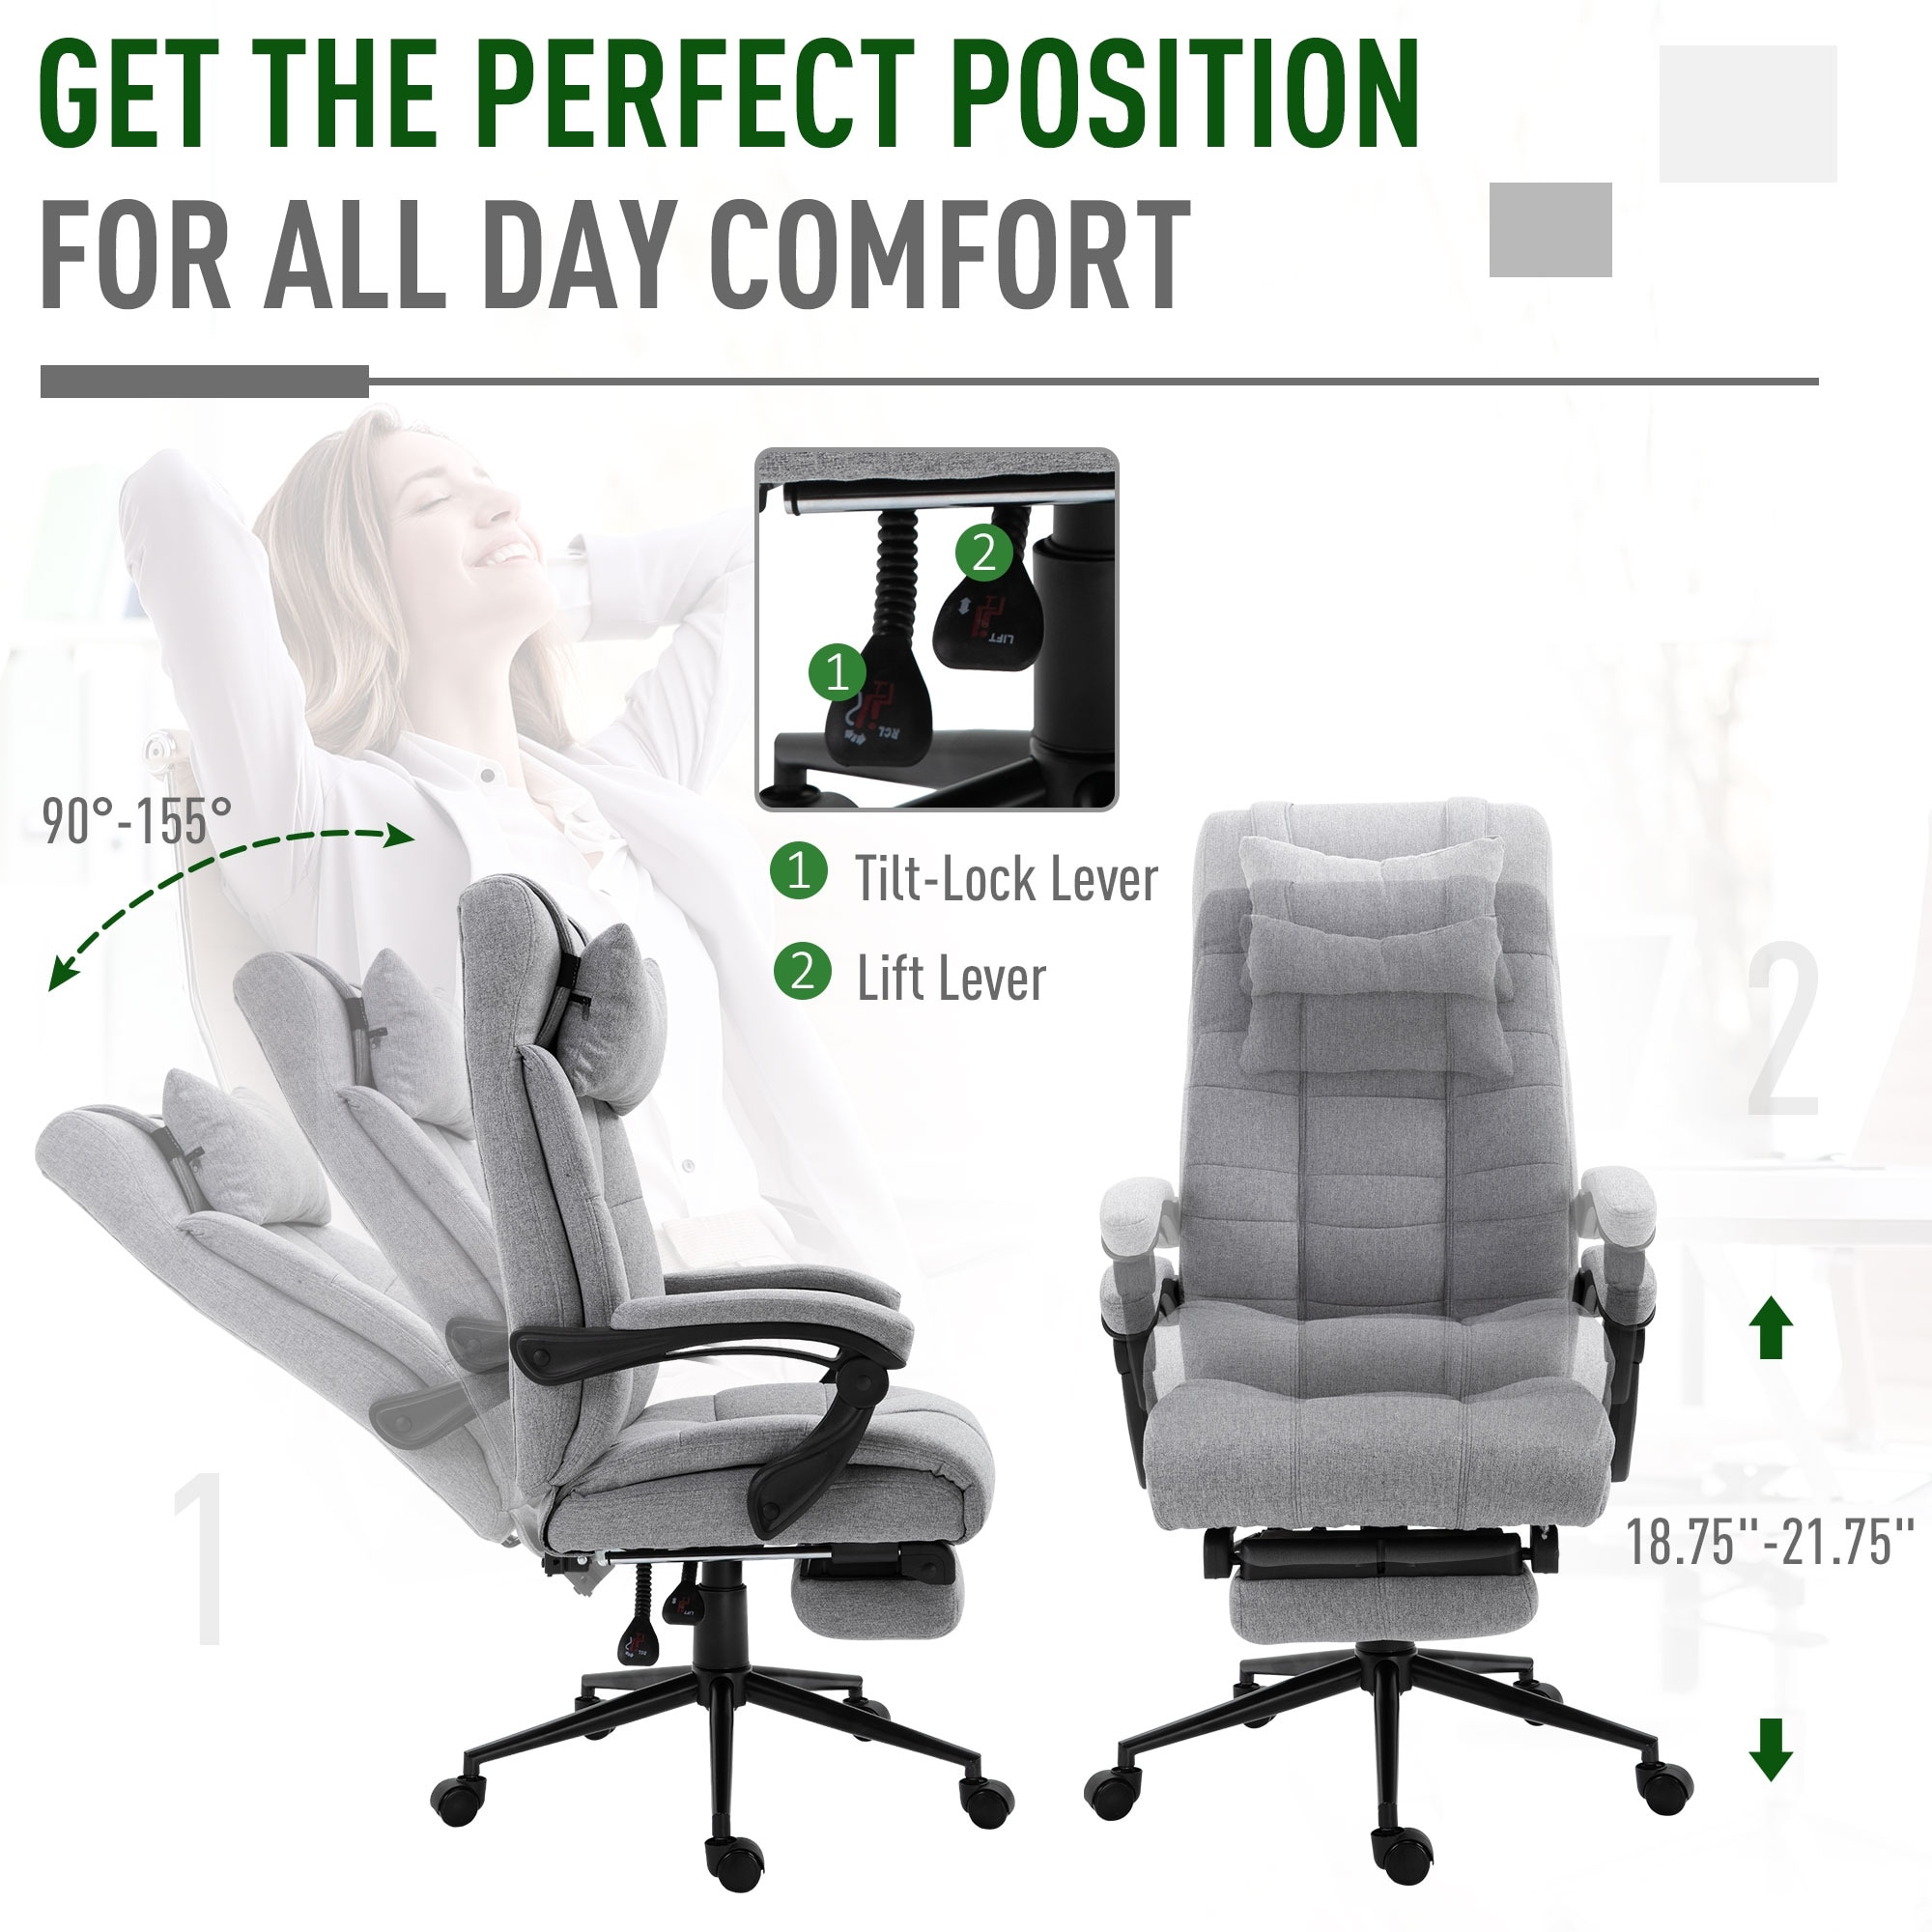 https://ak1.ostkcdn.com/images/products/is/images/direct/04ab40e2b8f01a09e7fd8e677e2c6e8da719b383/Vinsetto-Executive-Linen-Fabric-Home-Office-Chair-with-Retractable-Footrest%2C-Headrest%2C-and-Lumbar-Support.jpg